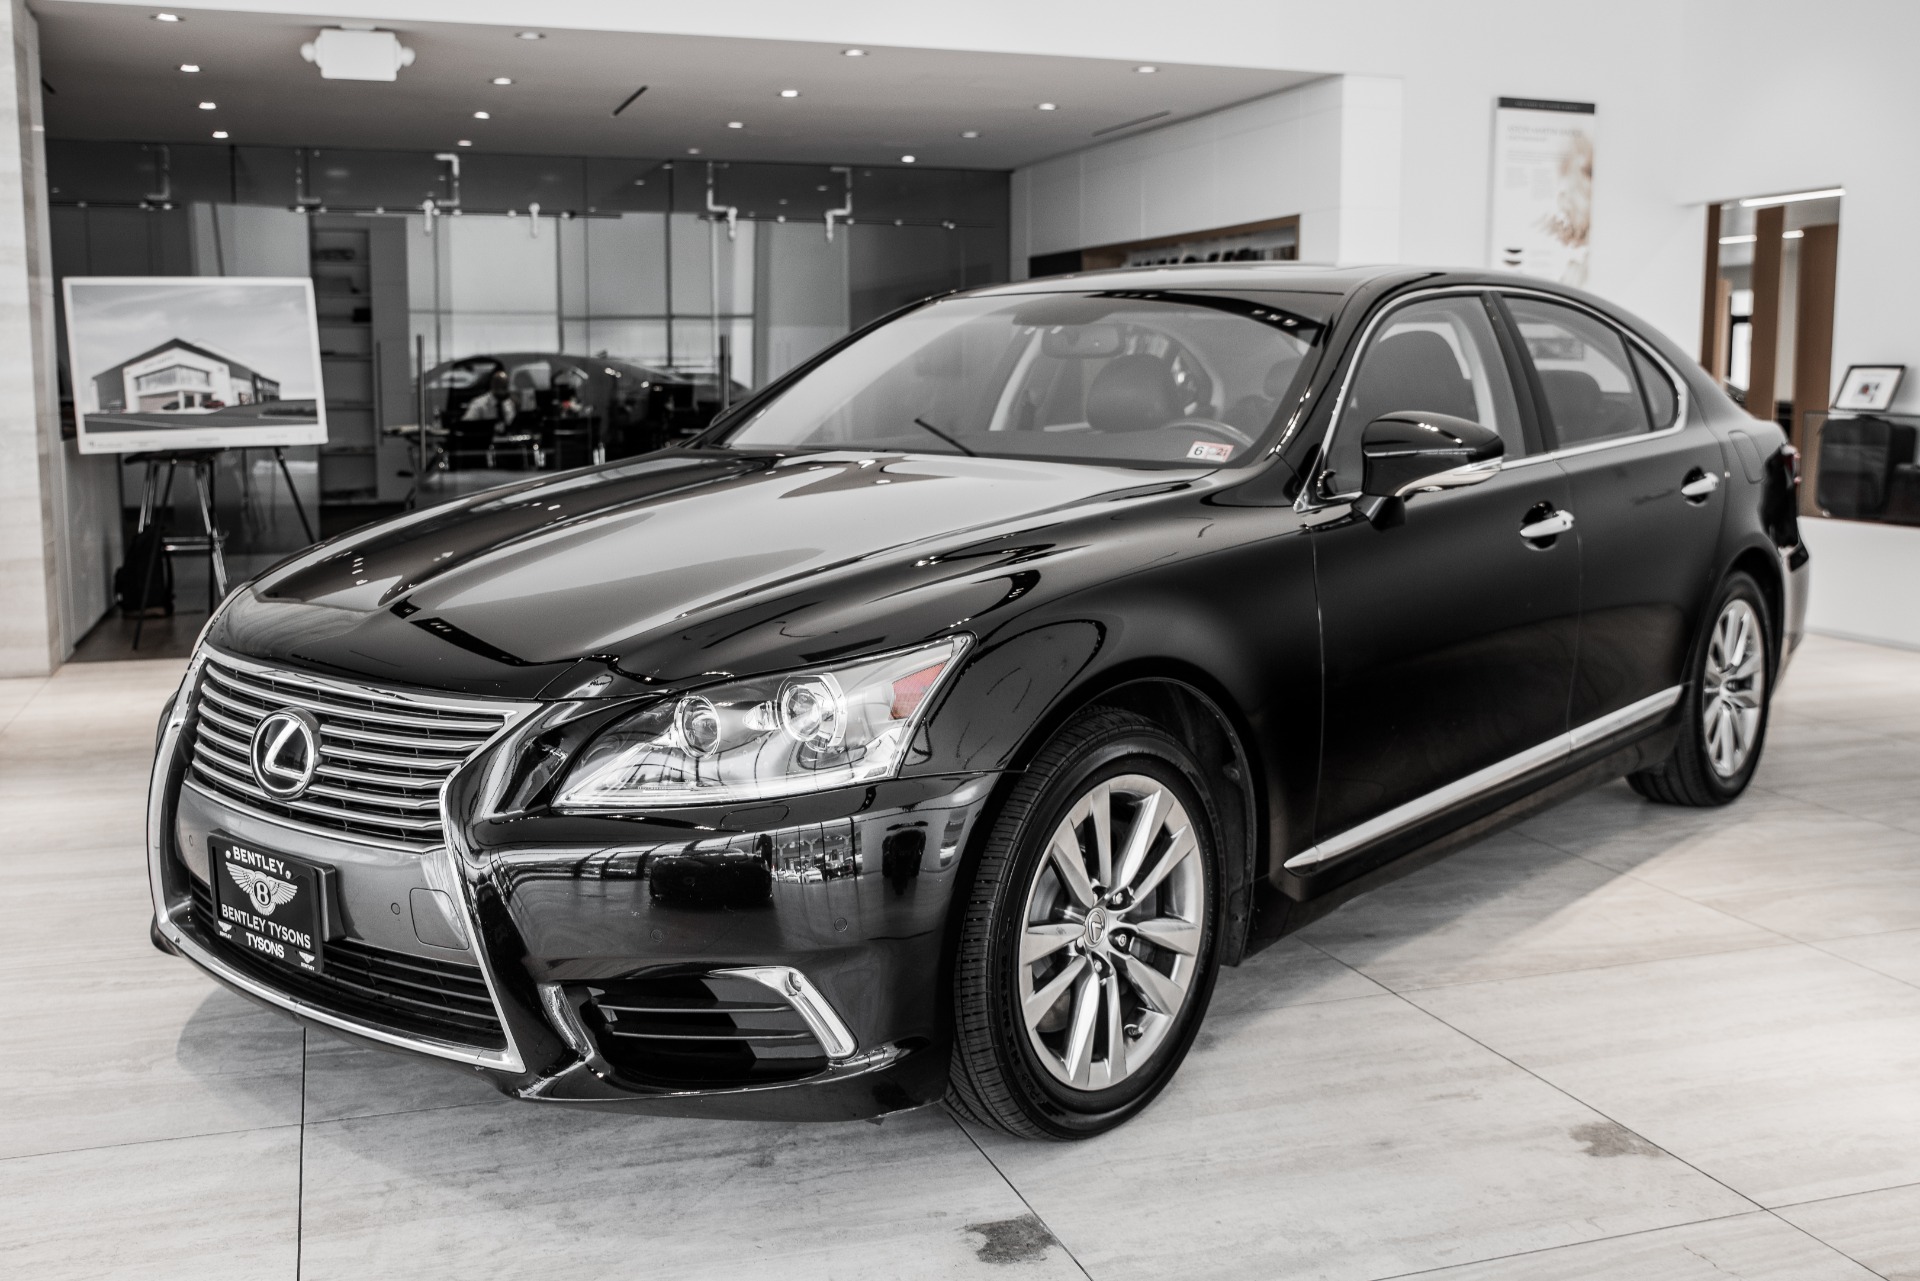 Used 2013 Lexus LS 460 For Sale (Sold)  Exclusive Automotive Group Stock  #P025241A